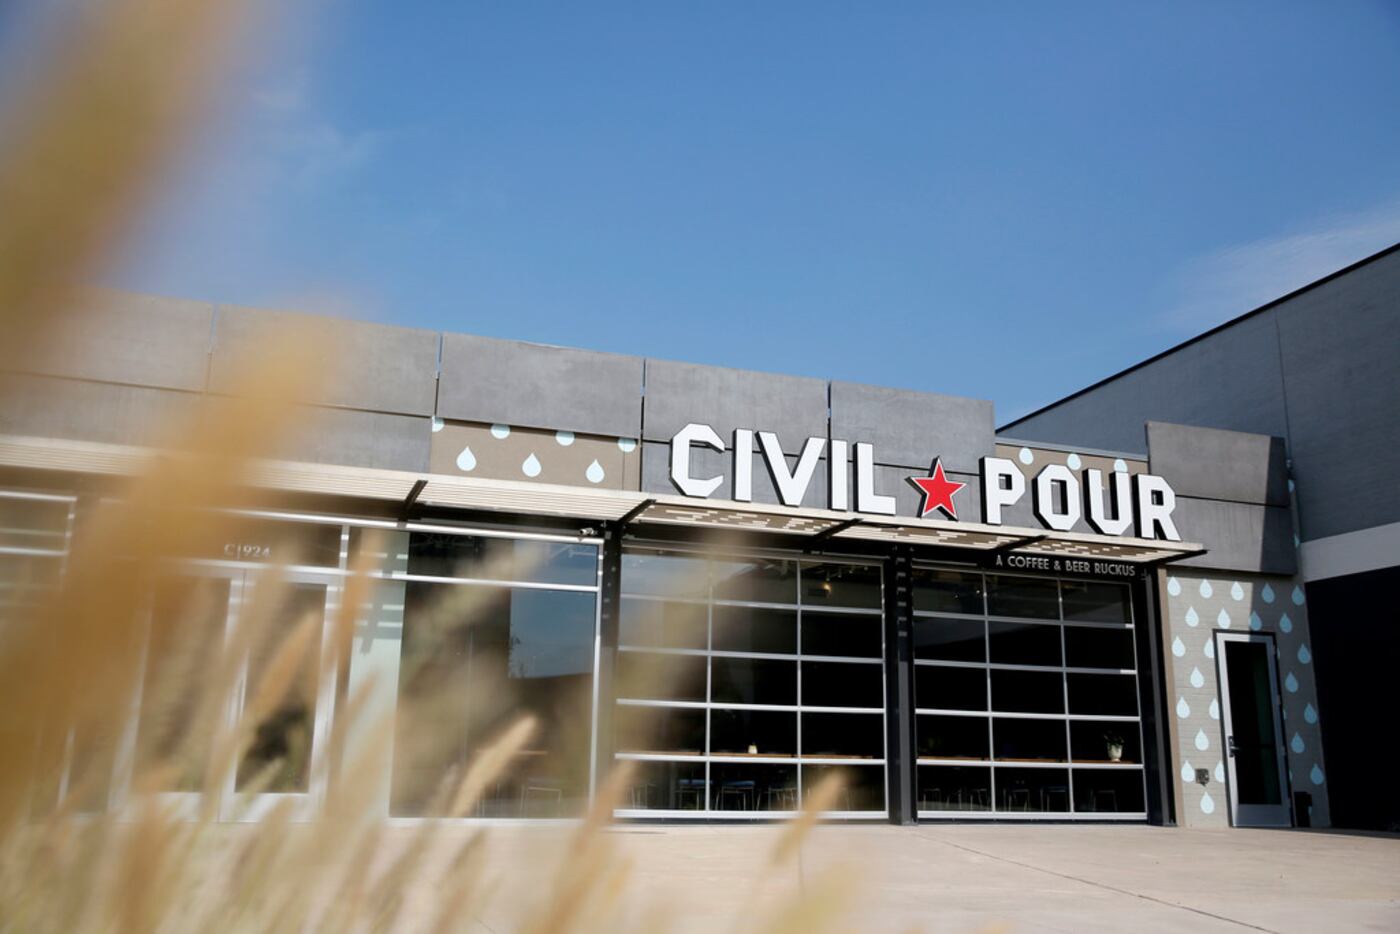 Civil Pour, a coffee and beer bar, in located in The Hill development off Walnut Hill Lane...